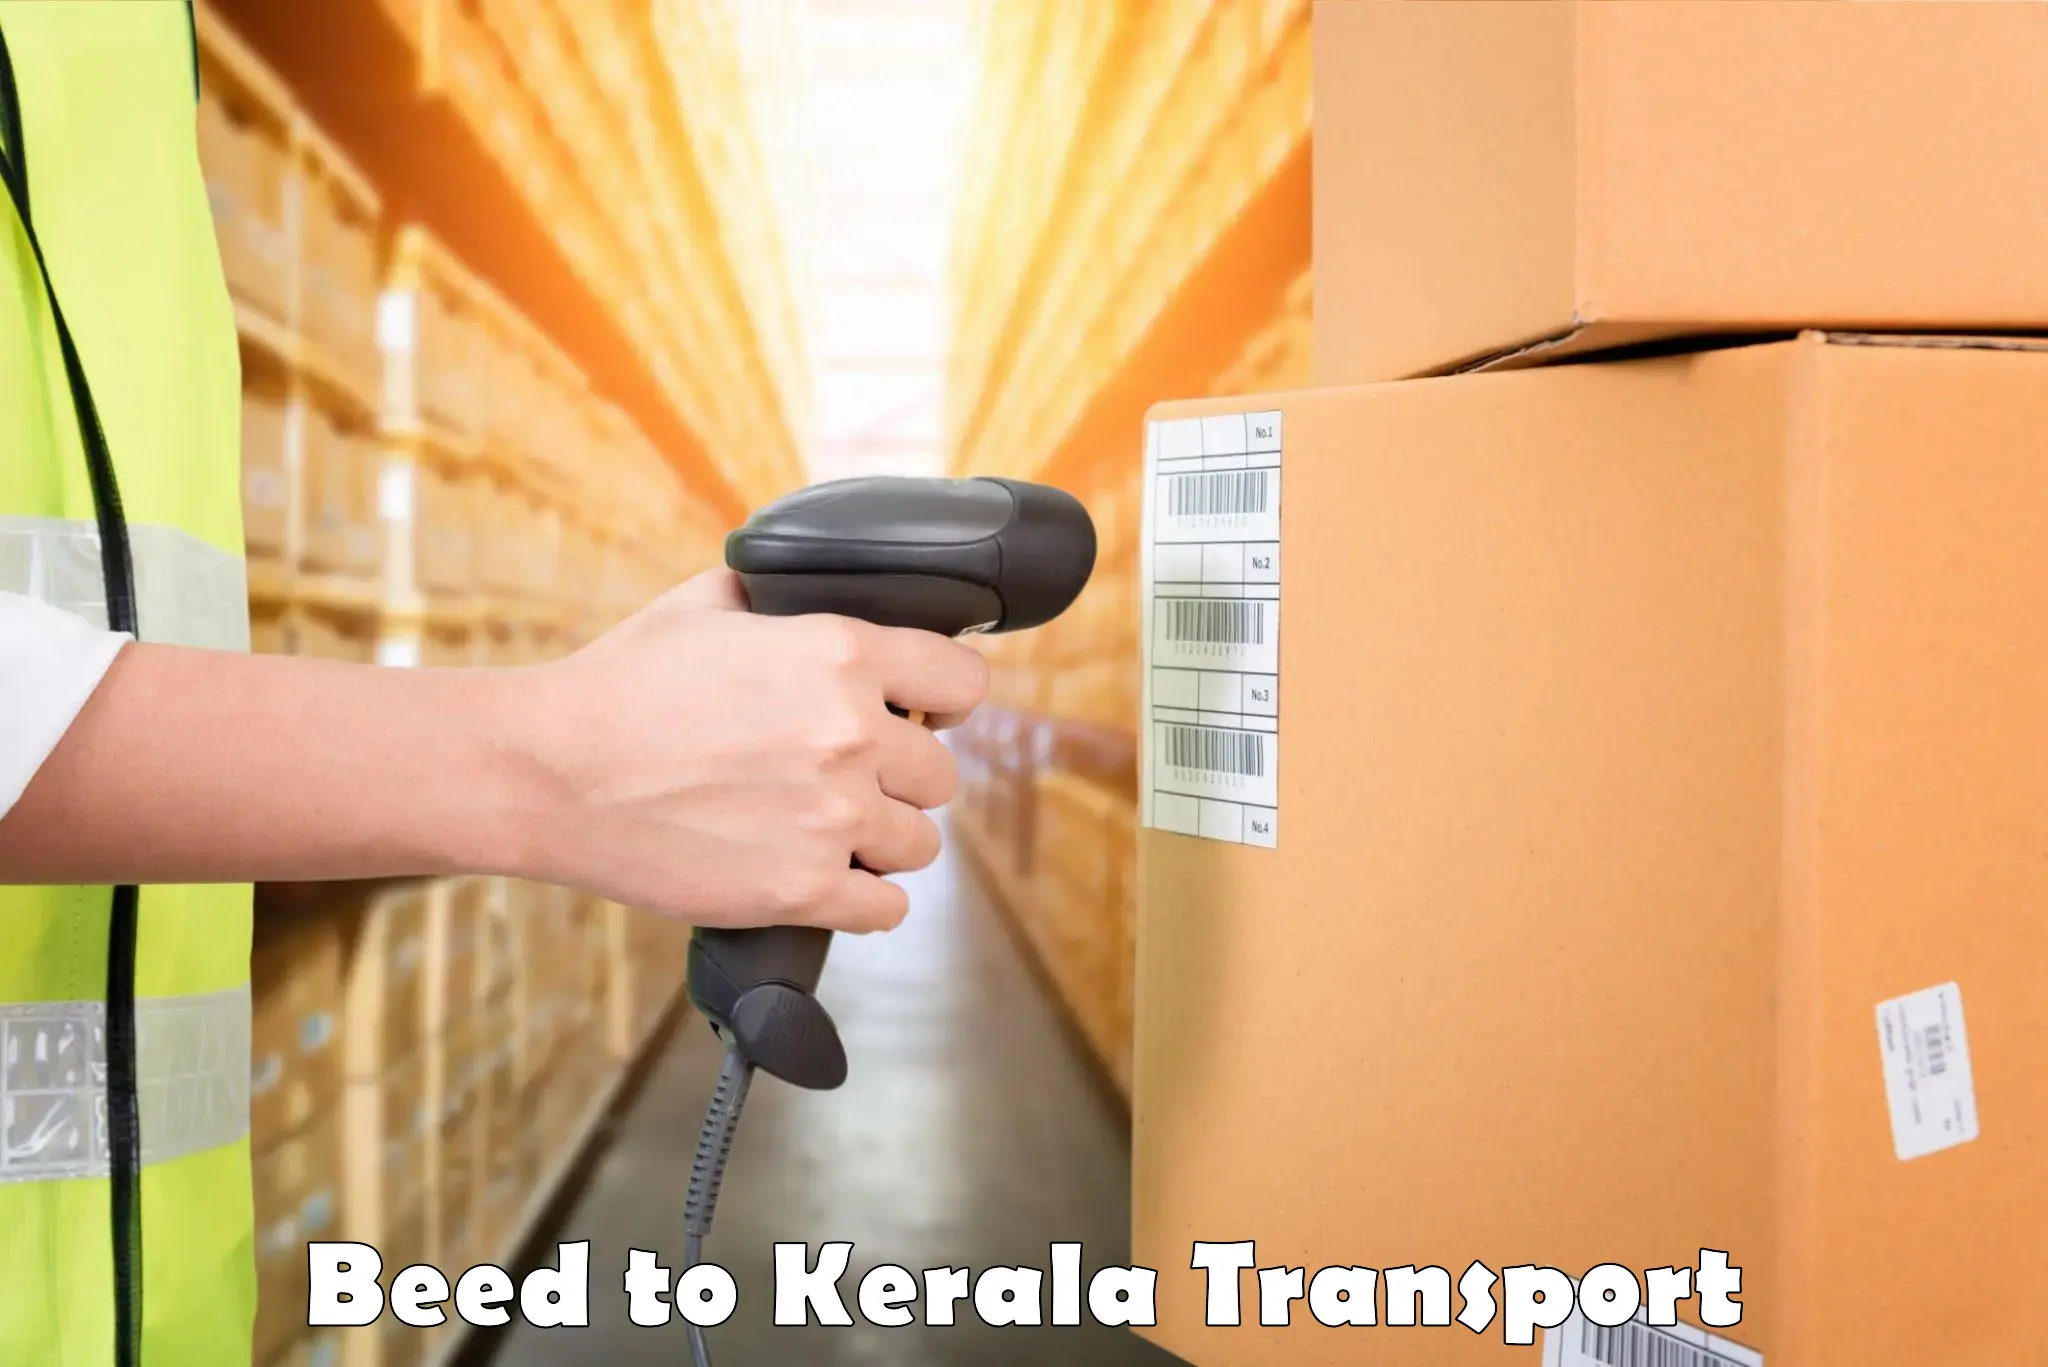 Online transport service Beed to Pala